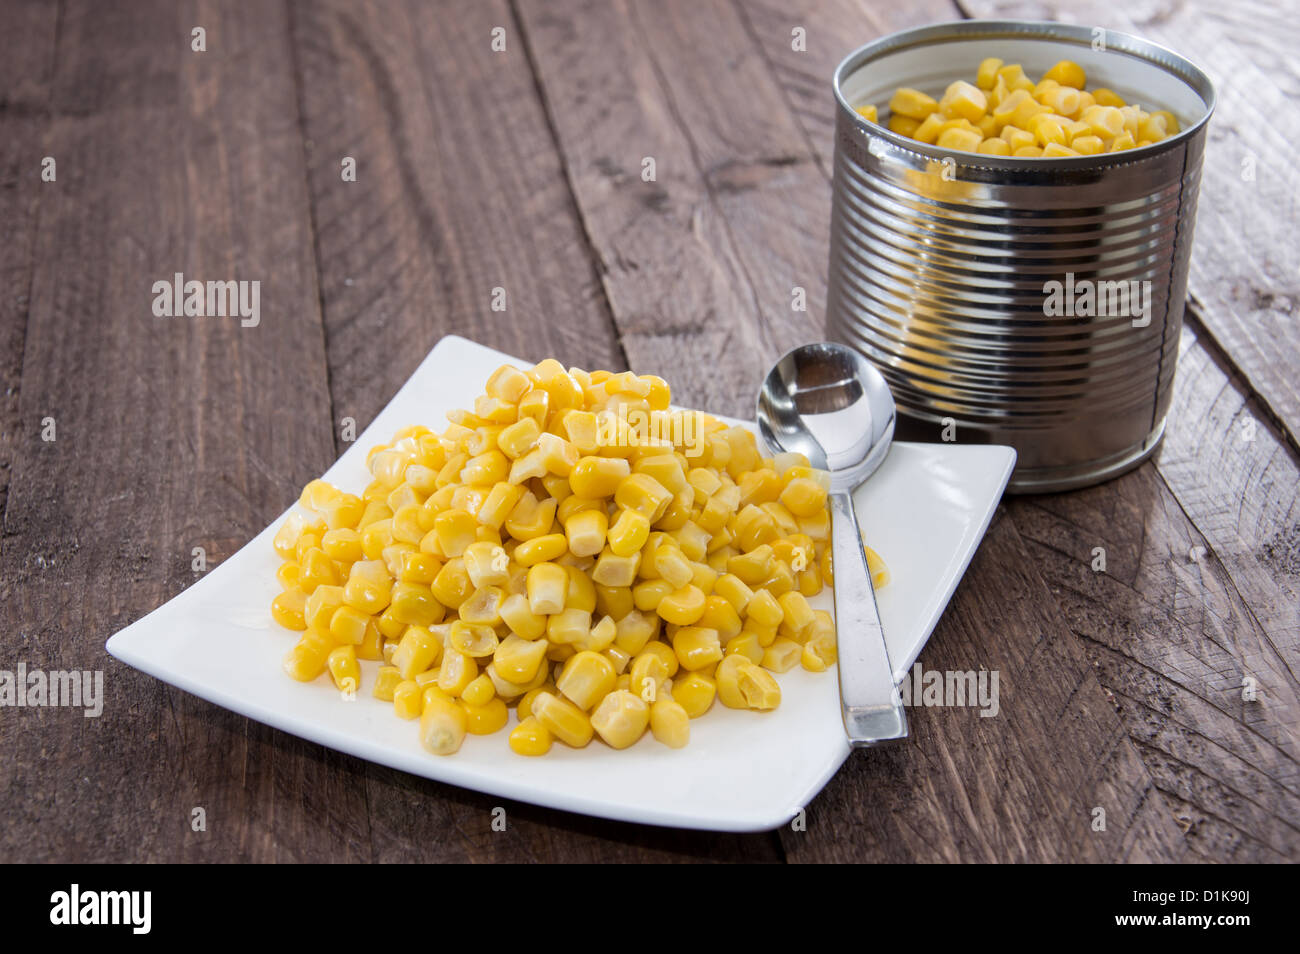 Plate with Corn on wooden background Stock Photo